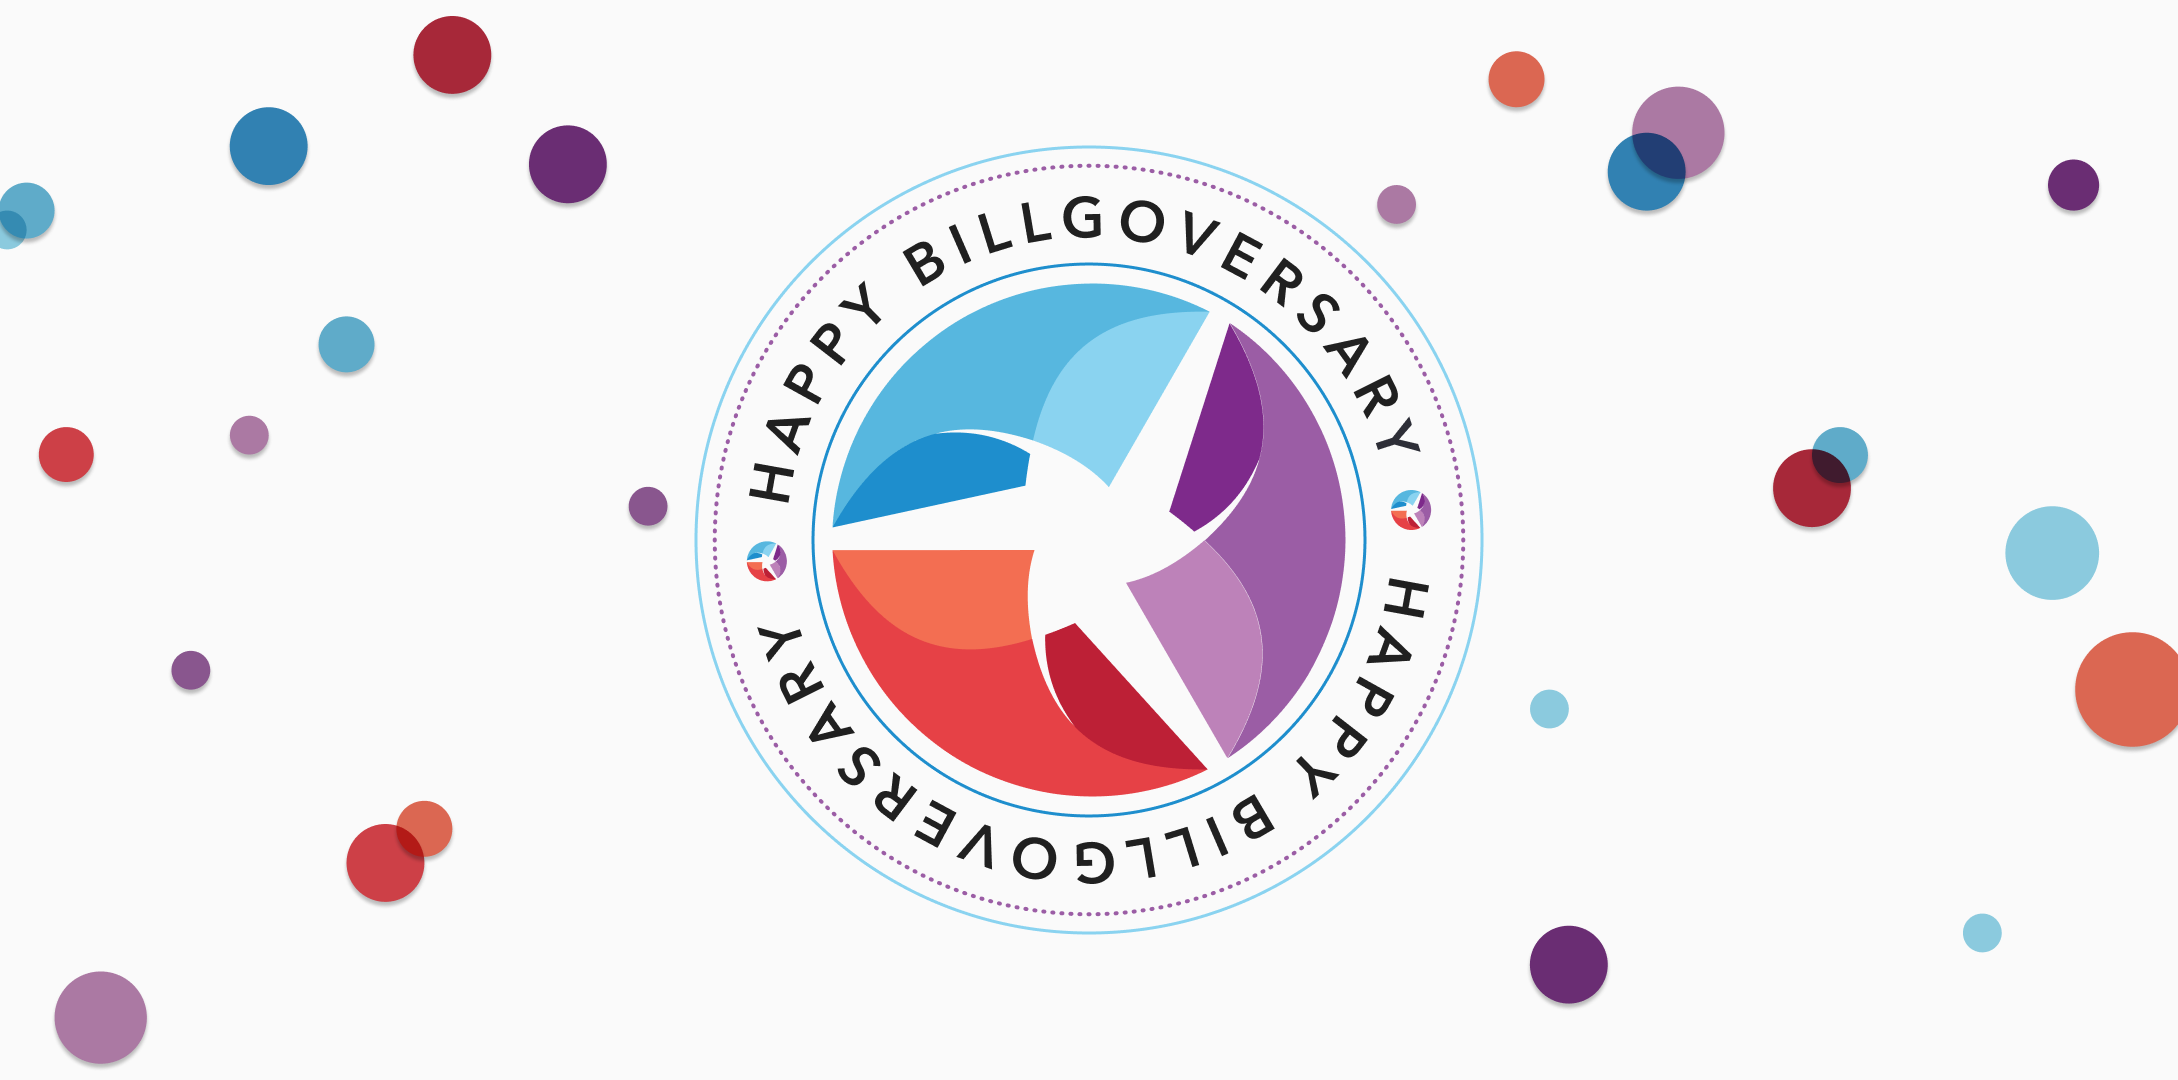 BillGO Celebrates 5 Years: What We’ve Learned